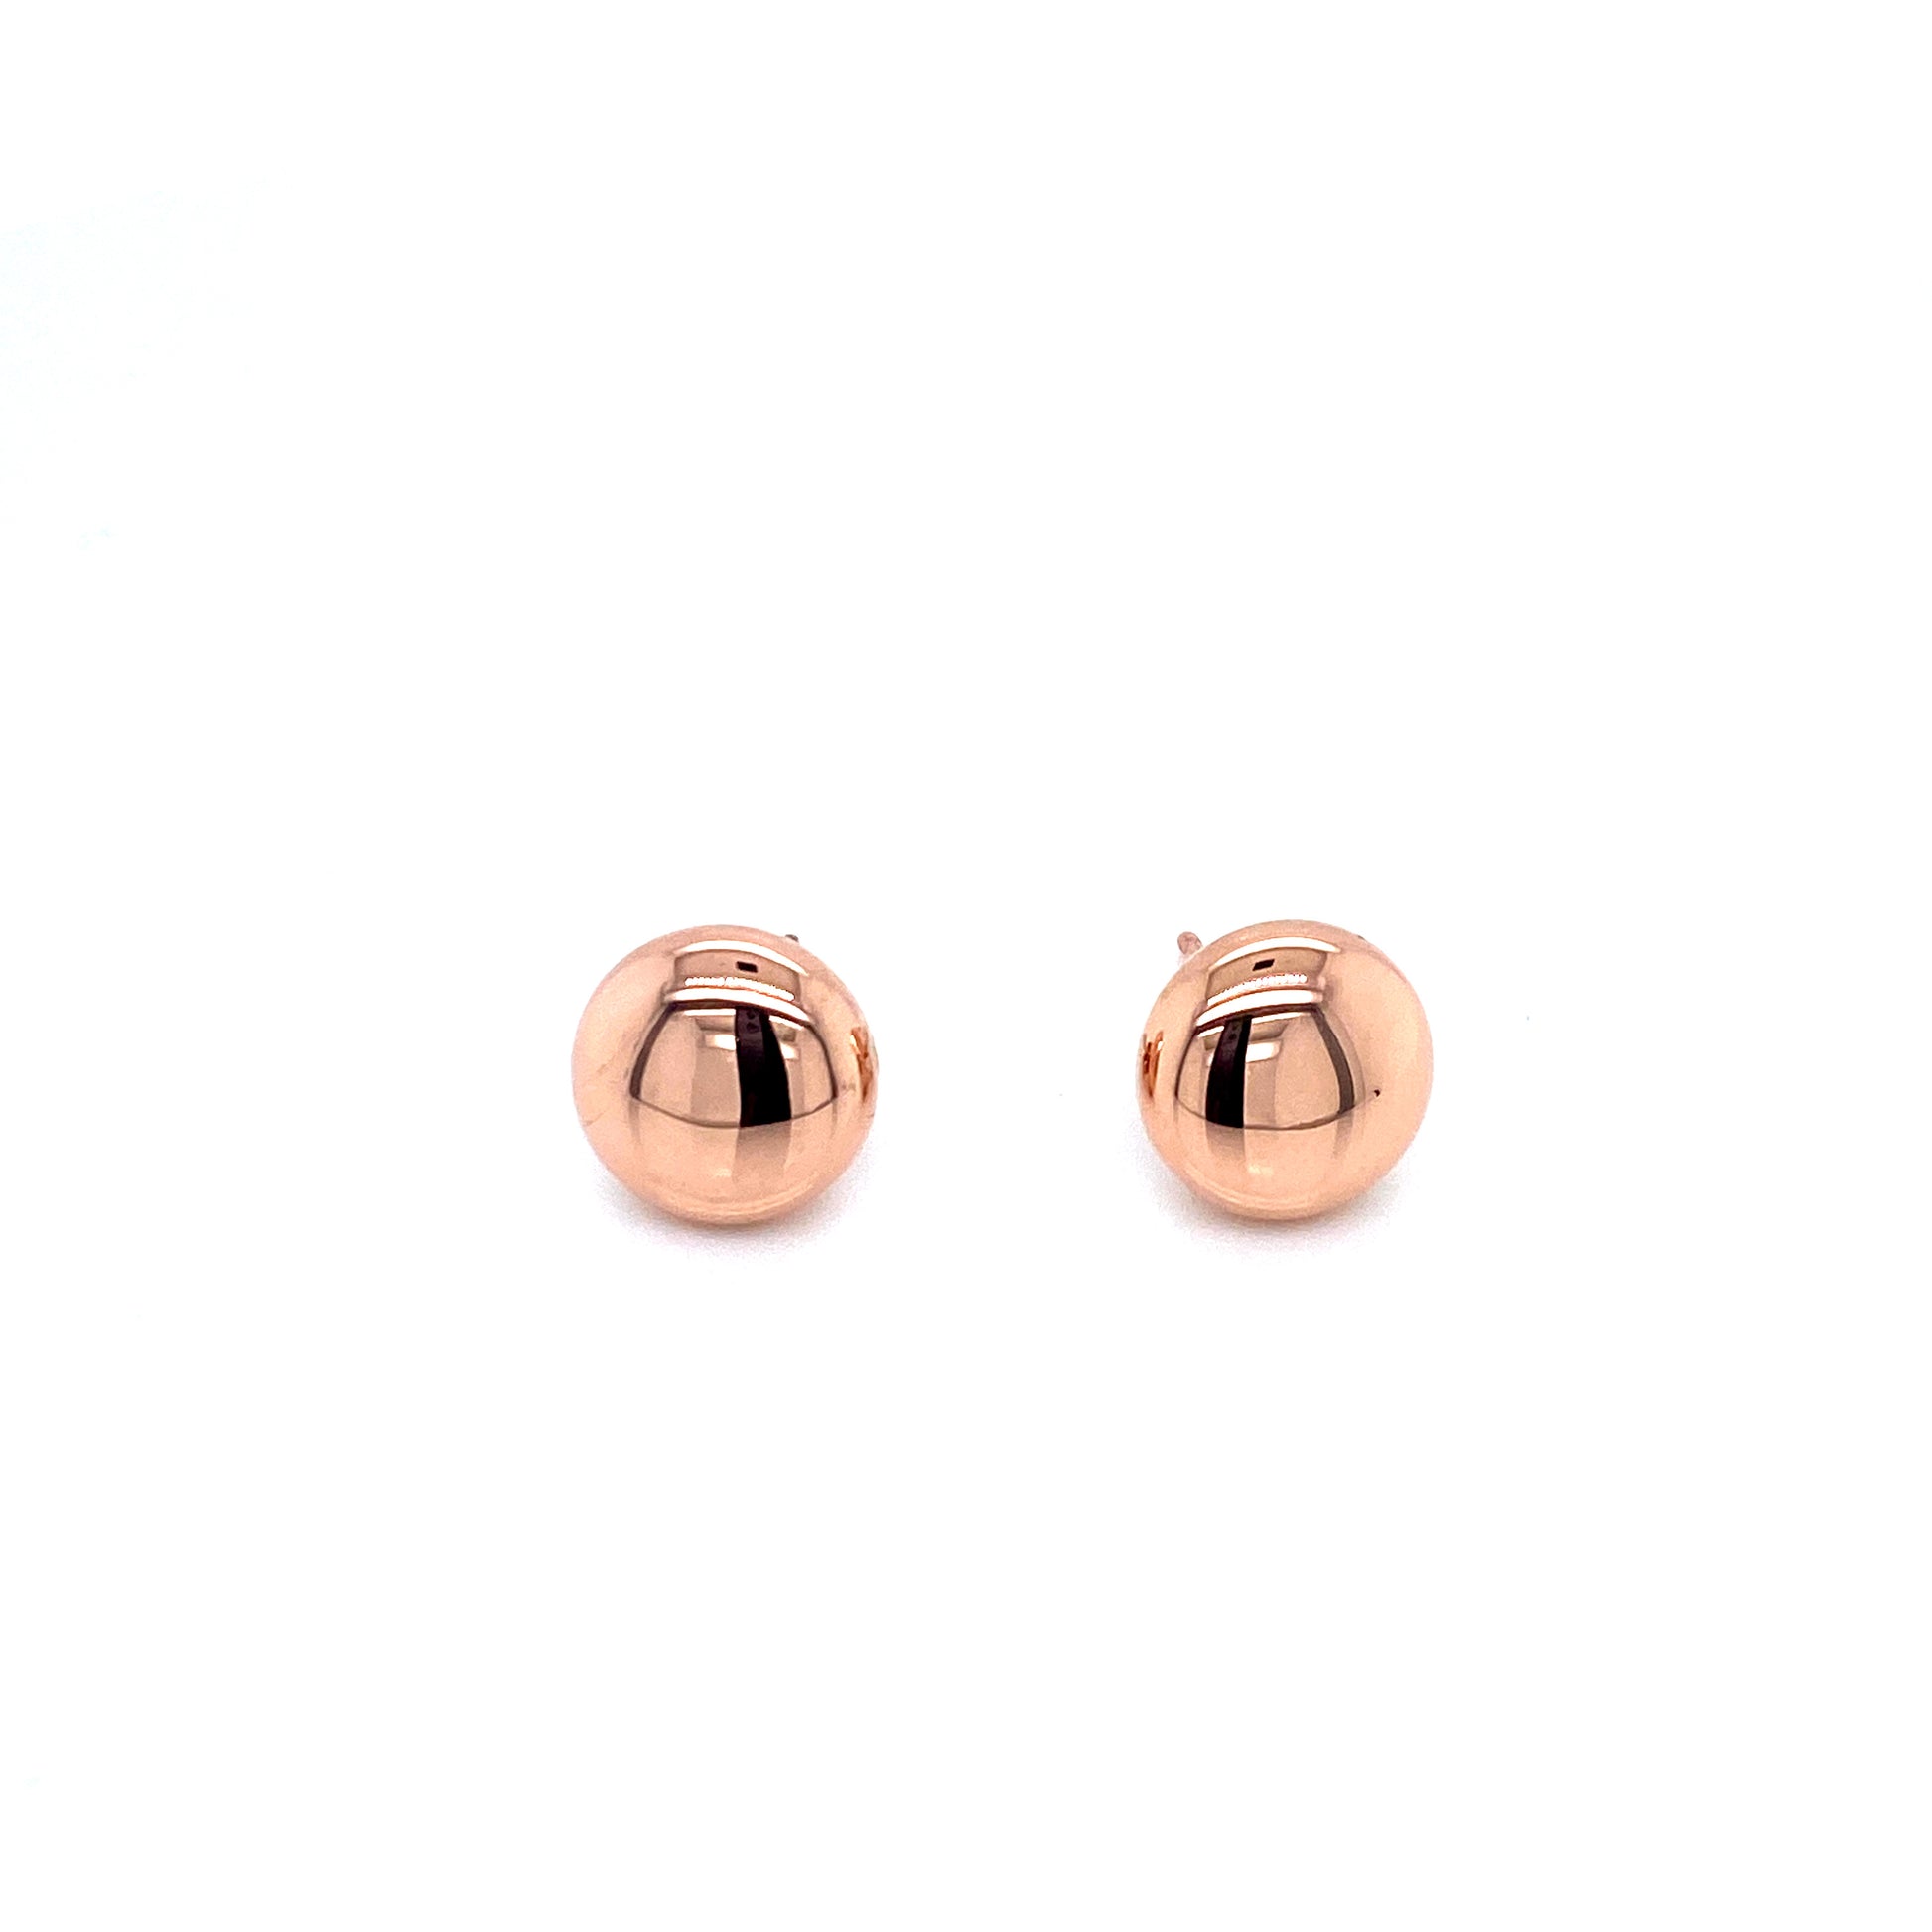 ROSE GOLD STUD EARRINGS | Luby Gold Collection | Luby 